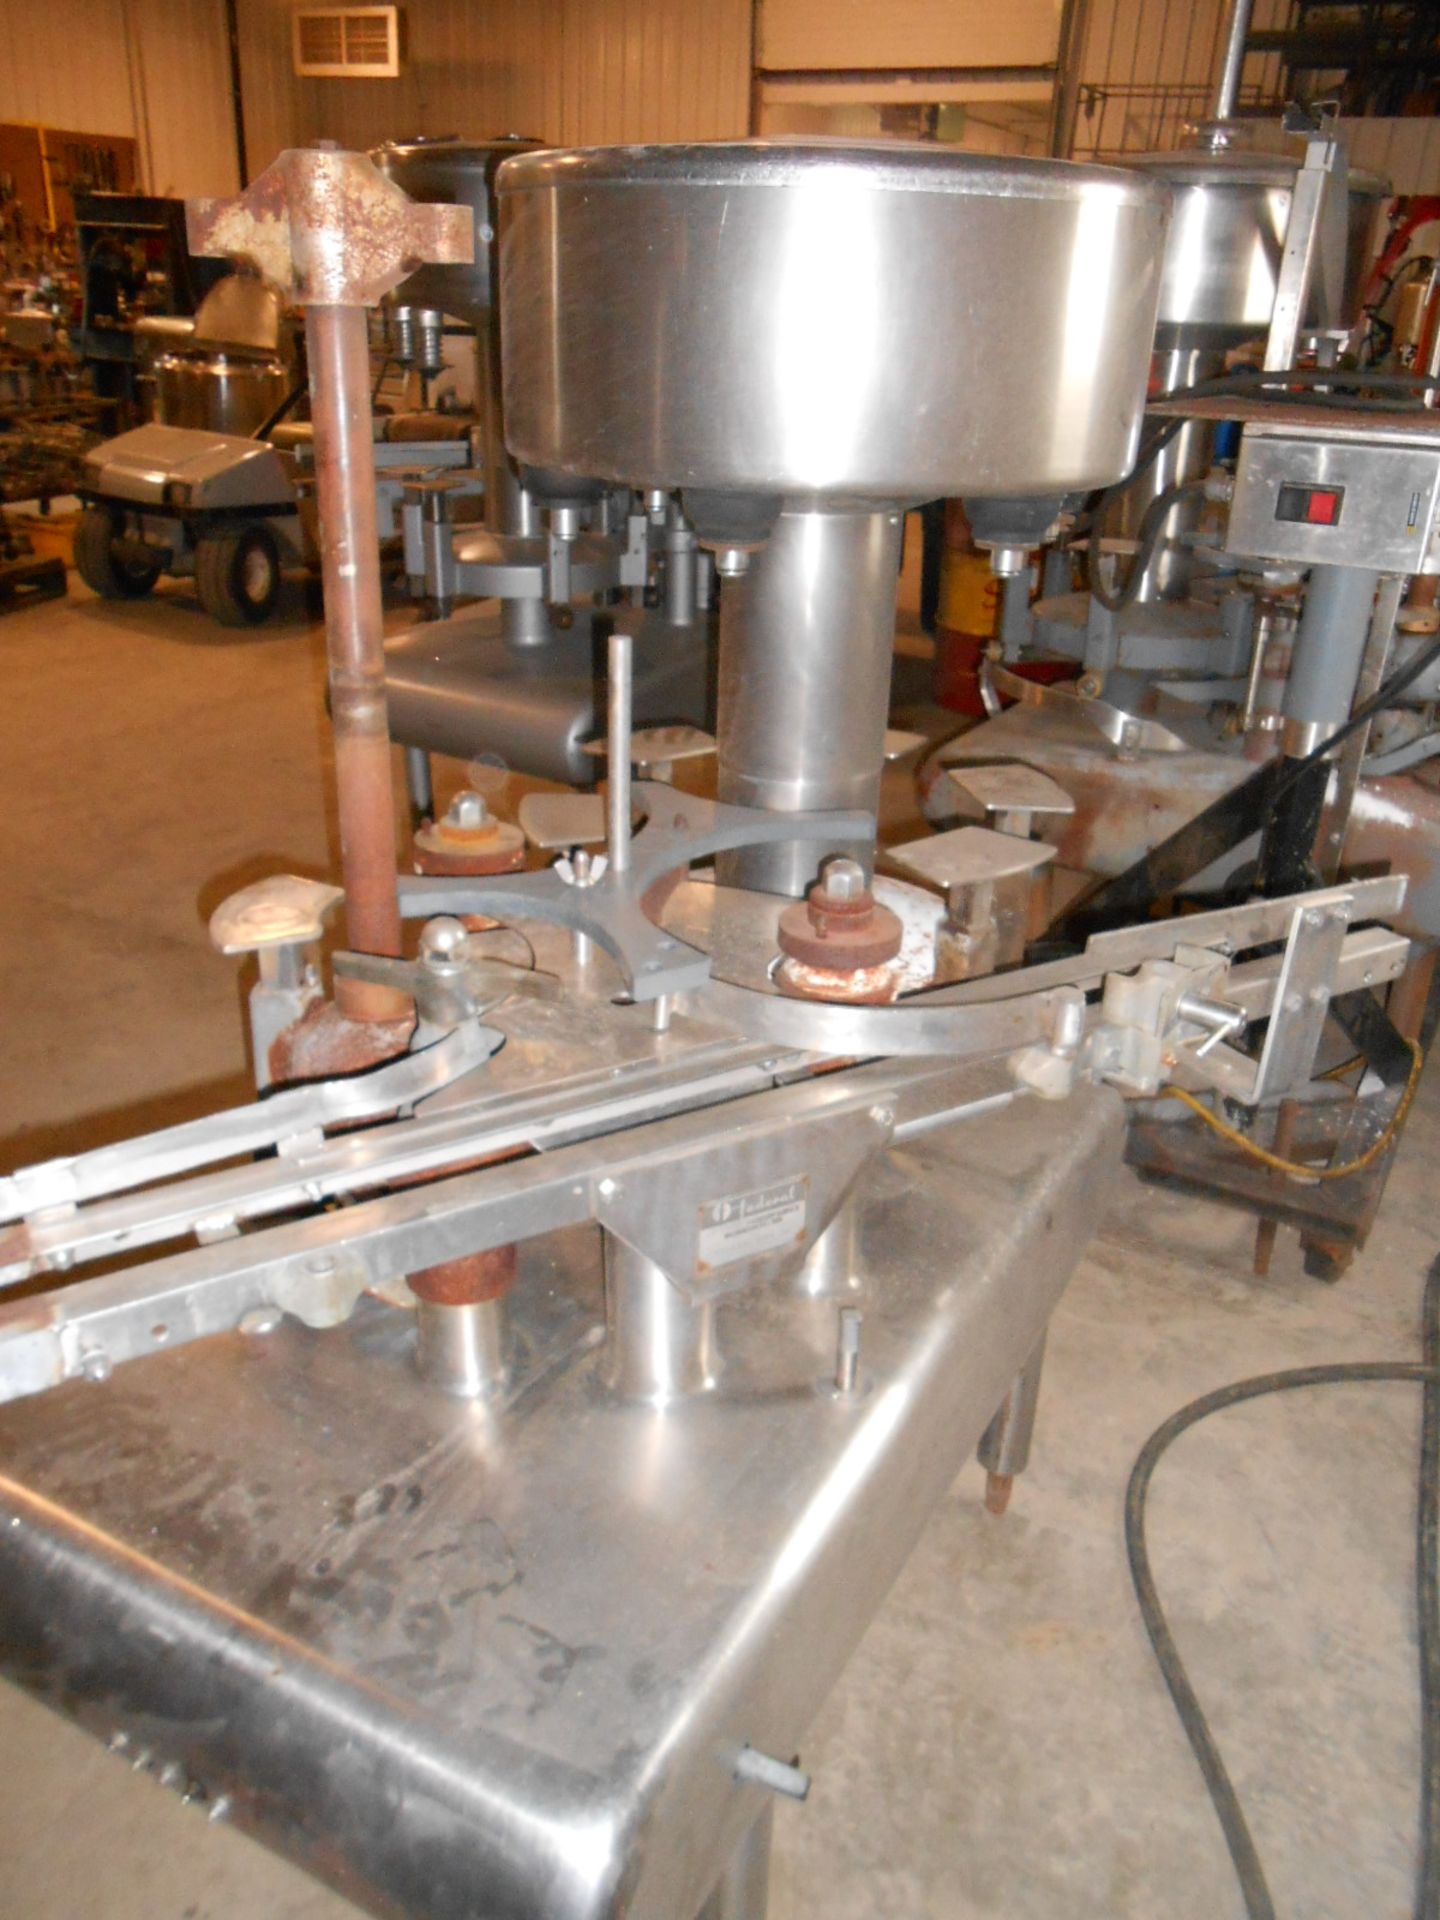 Federal 6 Valve Filler, Missing Motor, Capper, Drive and Chain Incomplete, Recommended For Parts